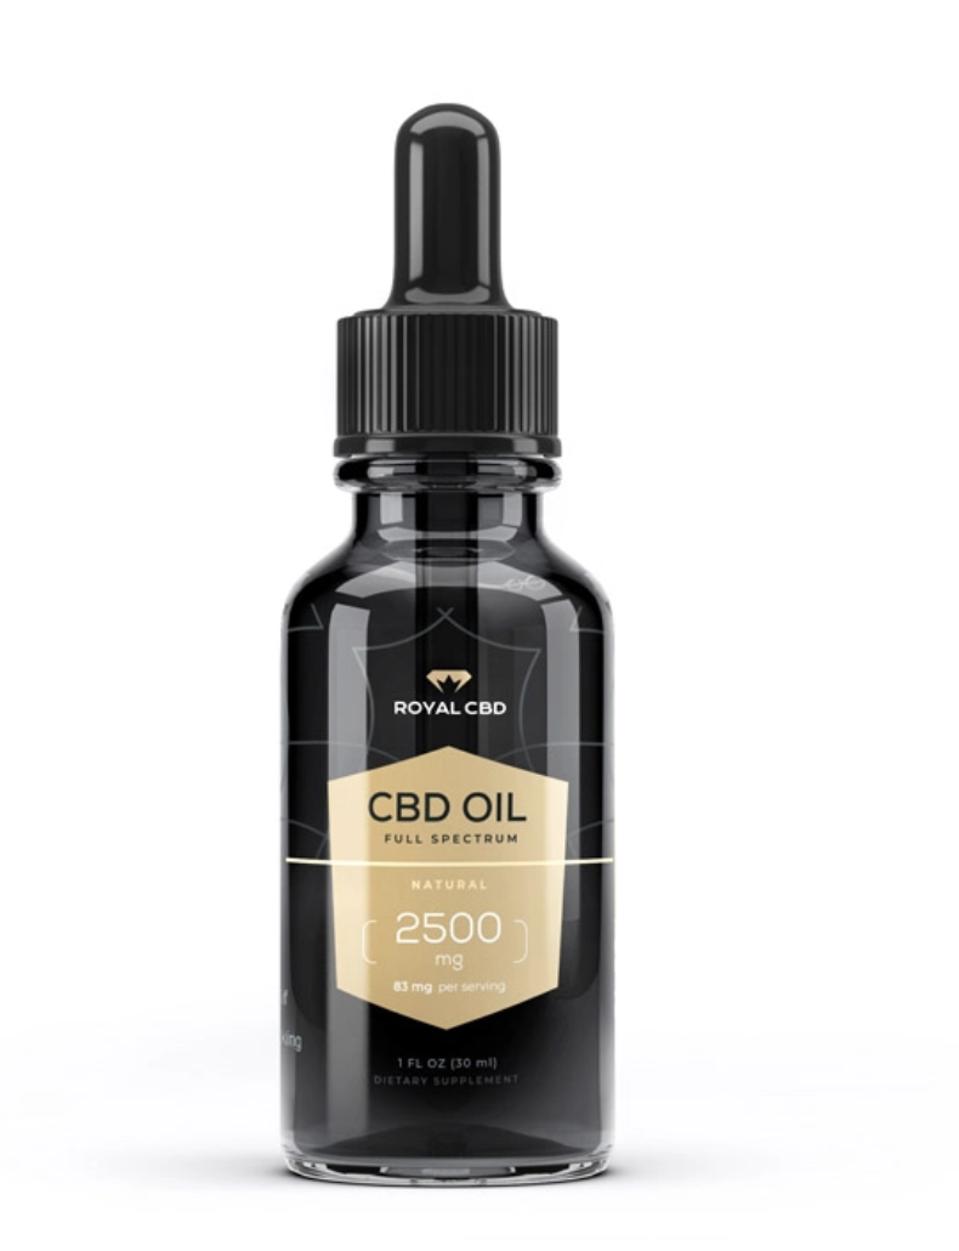 What to look for when buying CBD oil and how to find the best quality